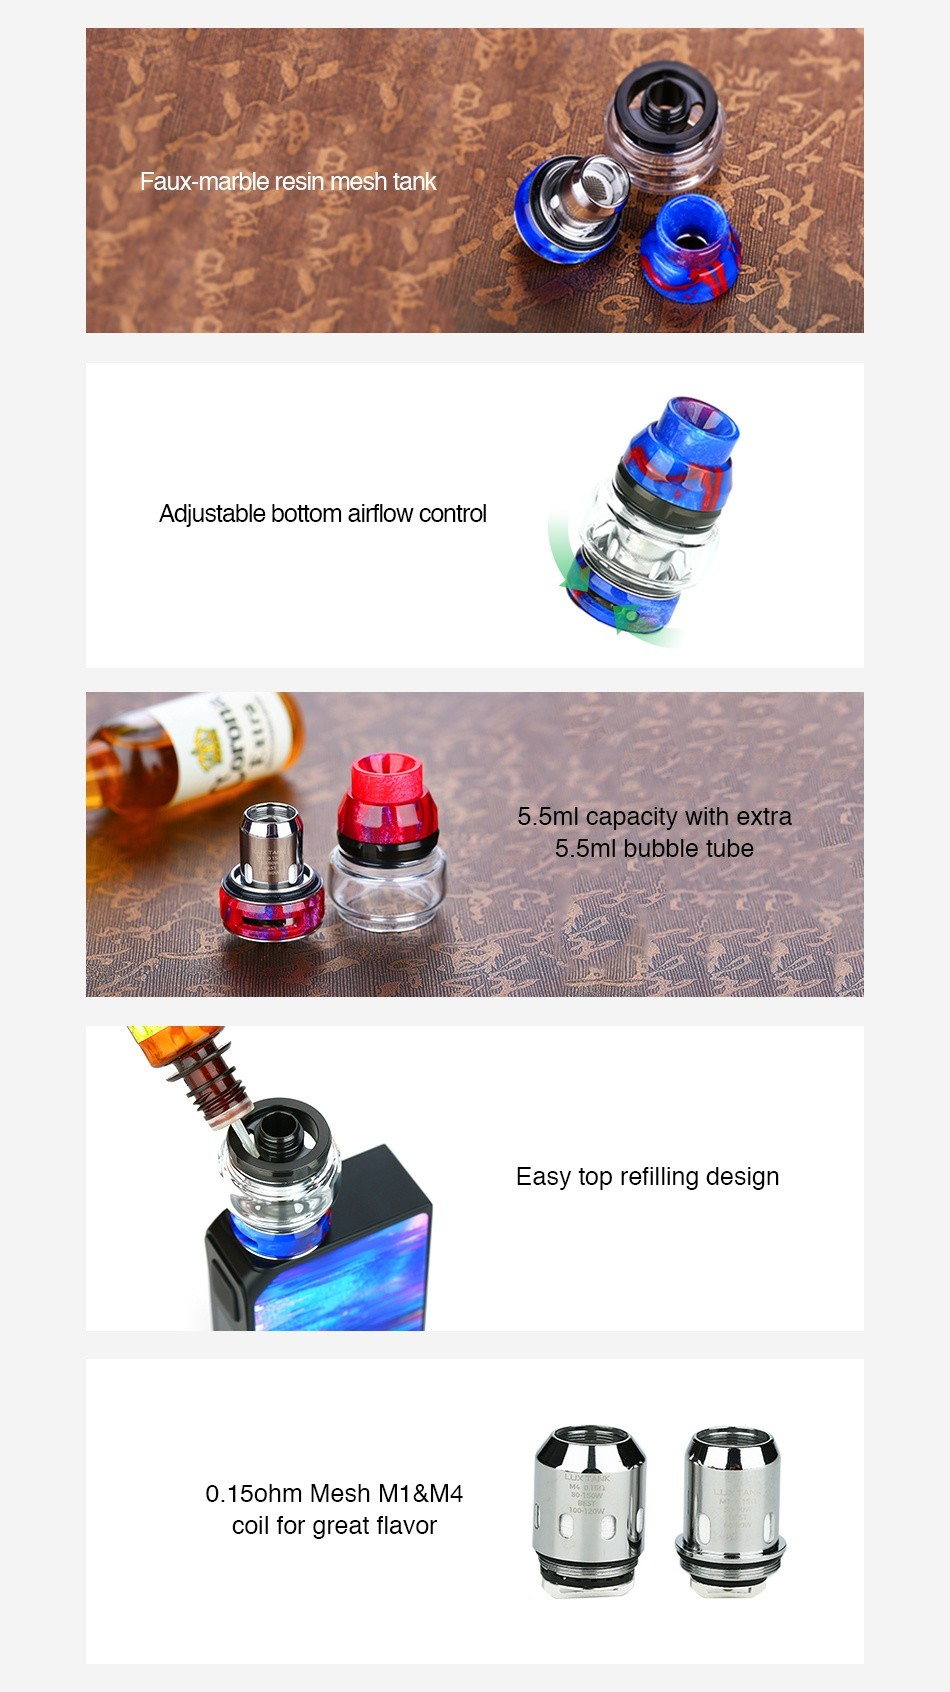 CoilART LUX Mesh Tank 5.5ml Faux marble resin mesh tank Adjustable bottom airflow control 5  5ml capacity with extra 5  5ml bubble tube asy top refilling design 0 1 5ohm mesh m1 M4 Coll Tor great flavor